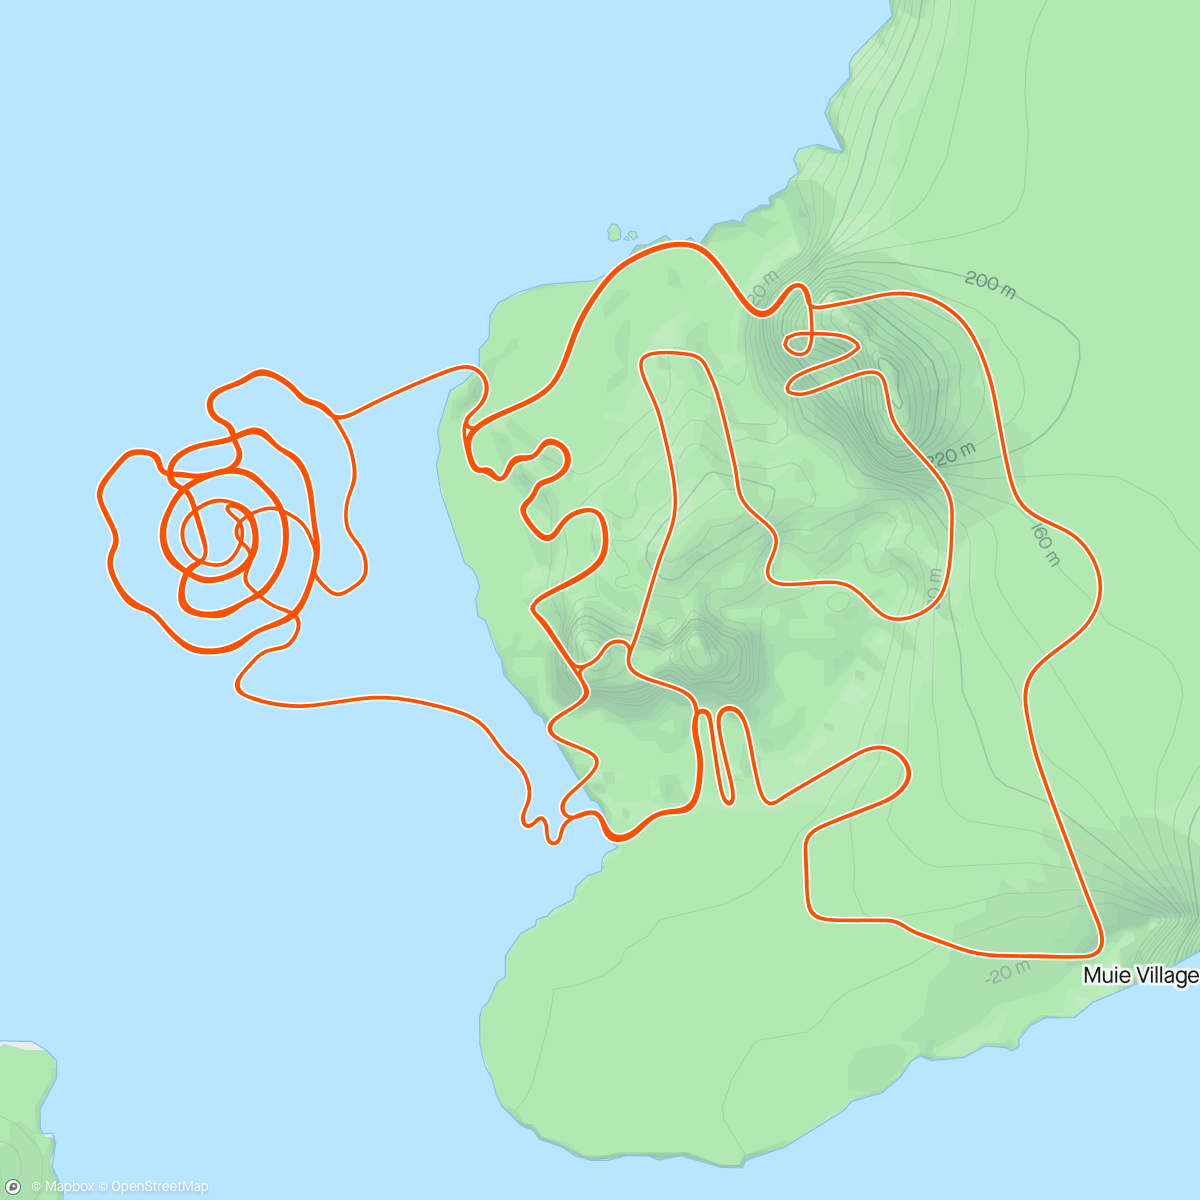 Map of the activity, the realization that one three hour ride has exponentially more benefit than three one hour rips.